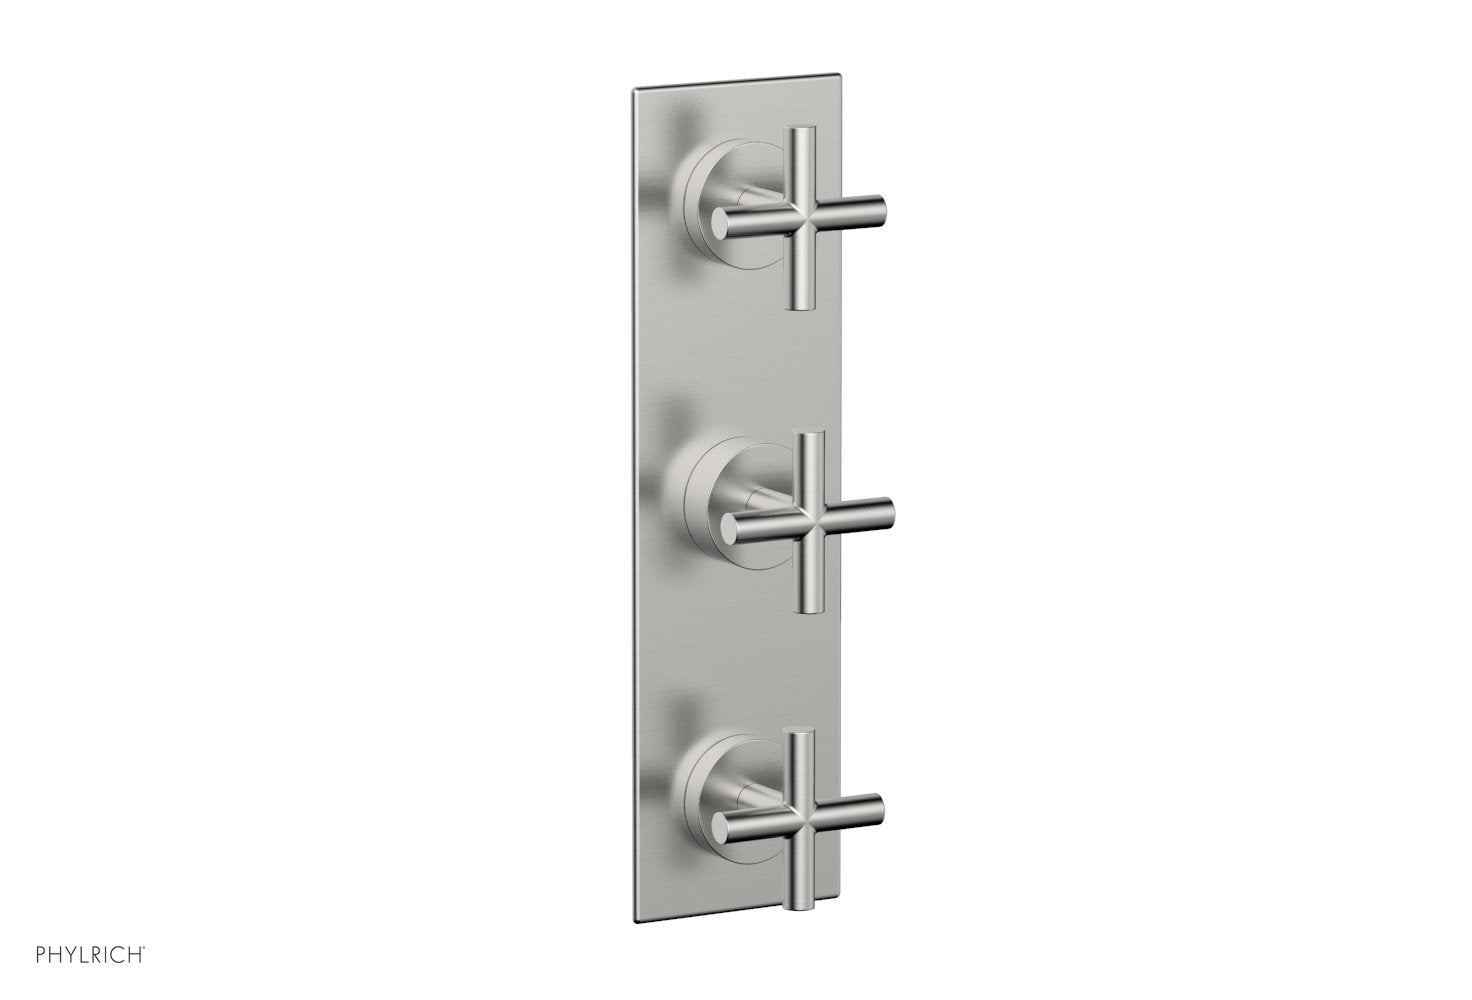 Phylrich TRANSITION 3/4" Thermostatic Valve with Two Volume Control, Cross Handles